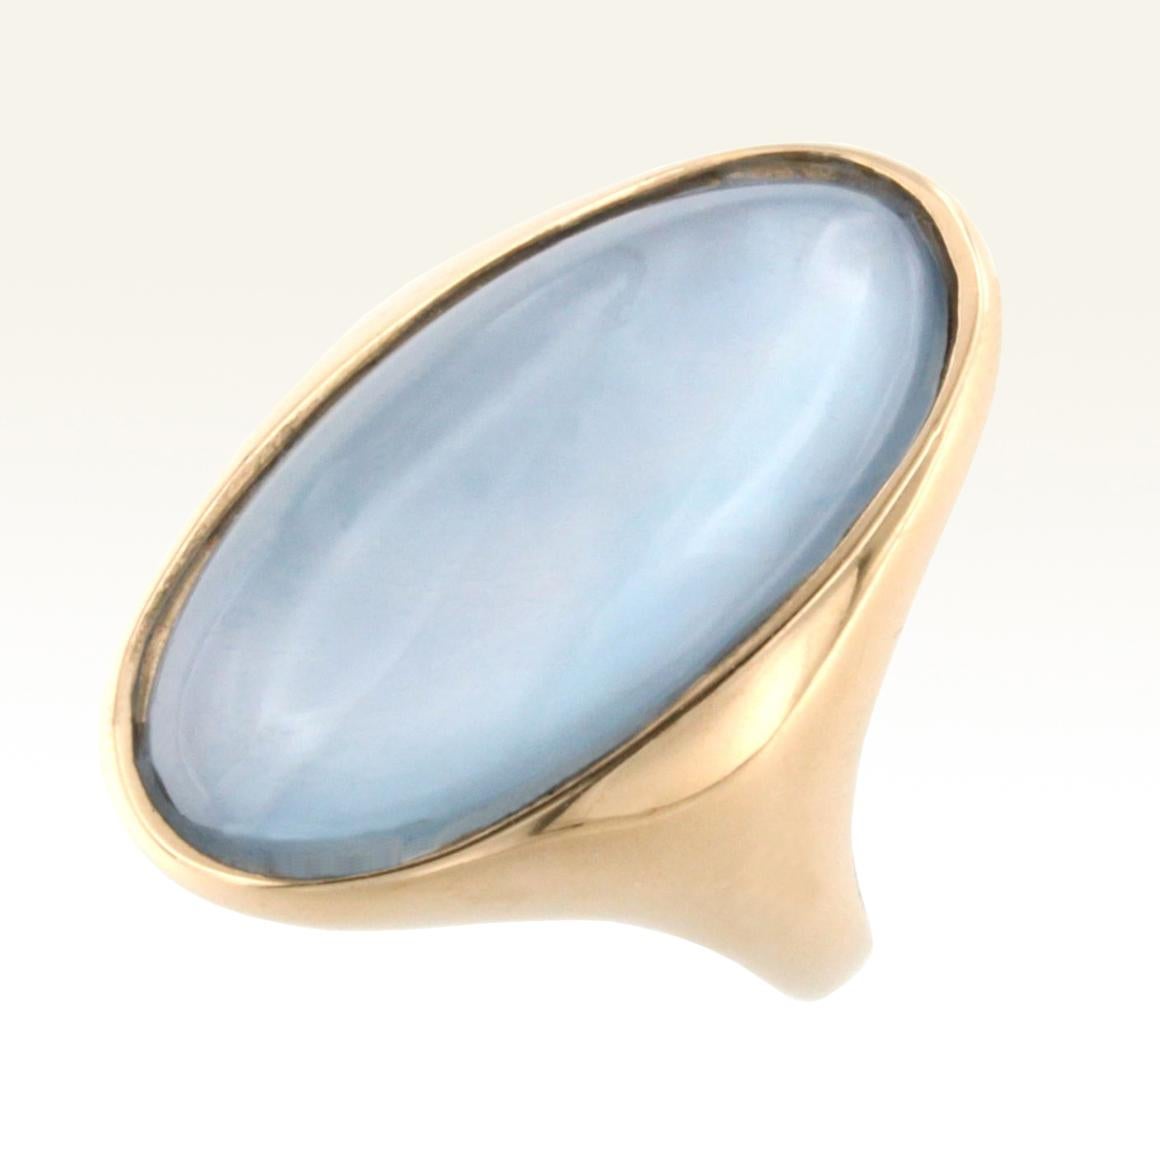 Ring in rose gold 18 Karat with Double stone: Mother of Pearl and Blue Topaz cabochon oval cut (size: 12x25 mm).
This ring is part of the new collection 